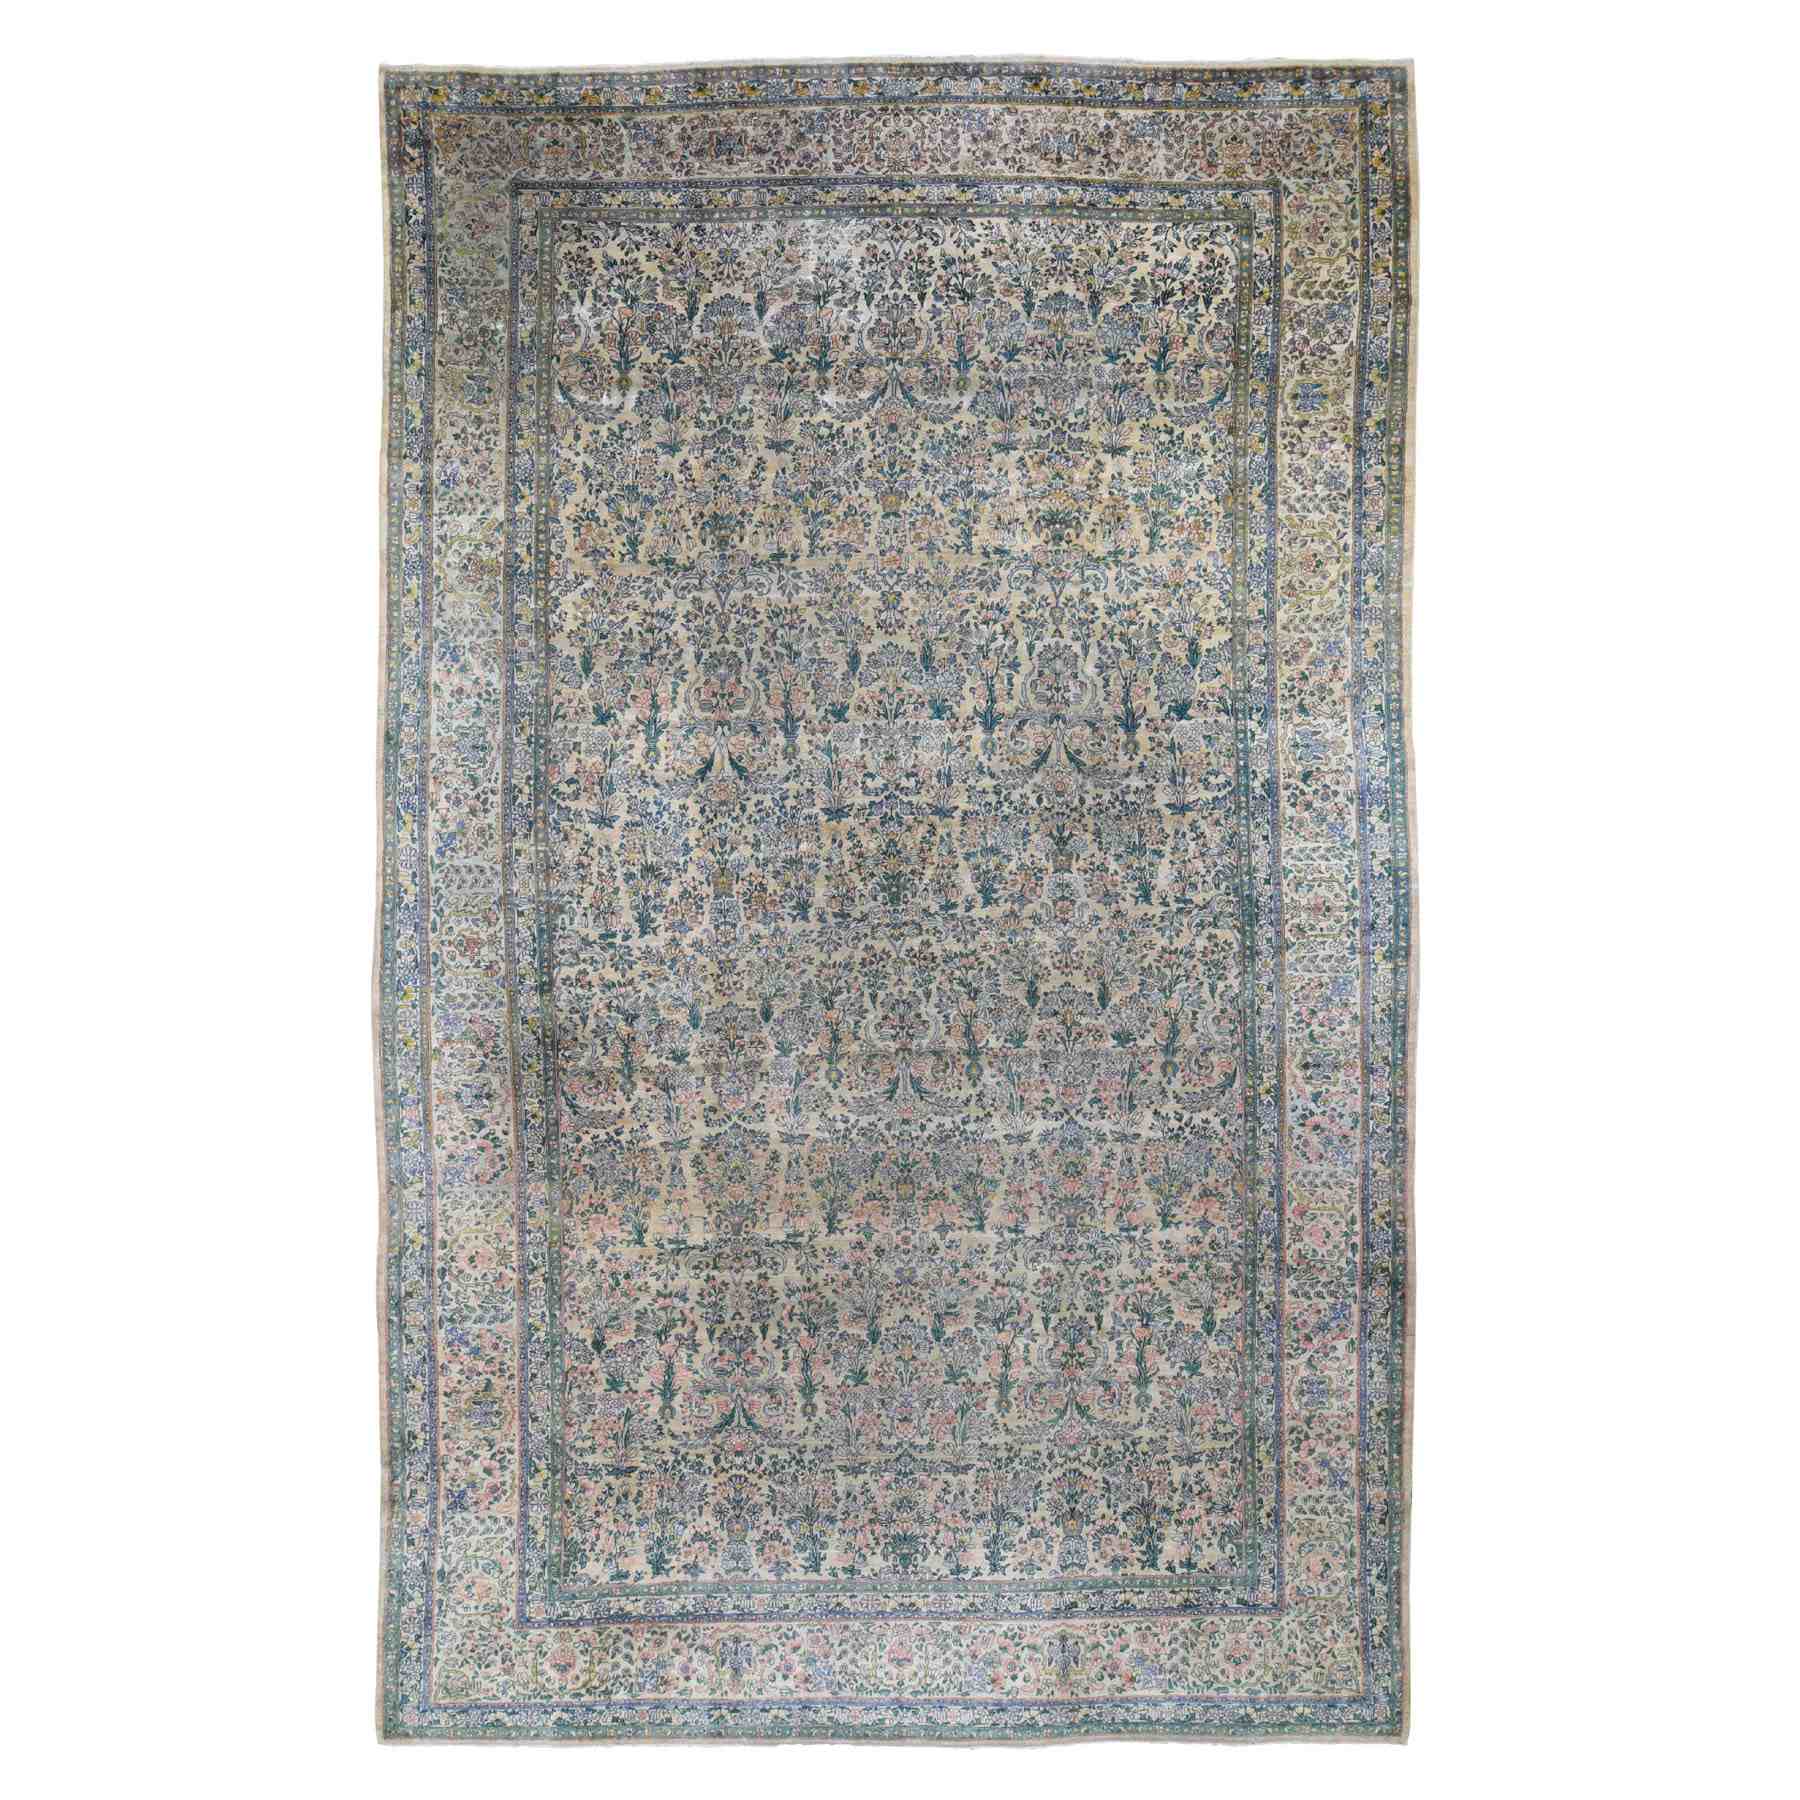 Antique-Hand-Knotted-Rug-242300